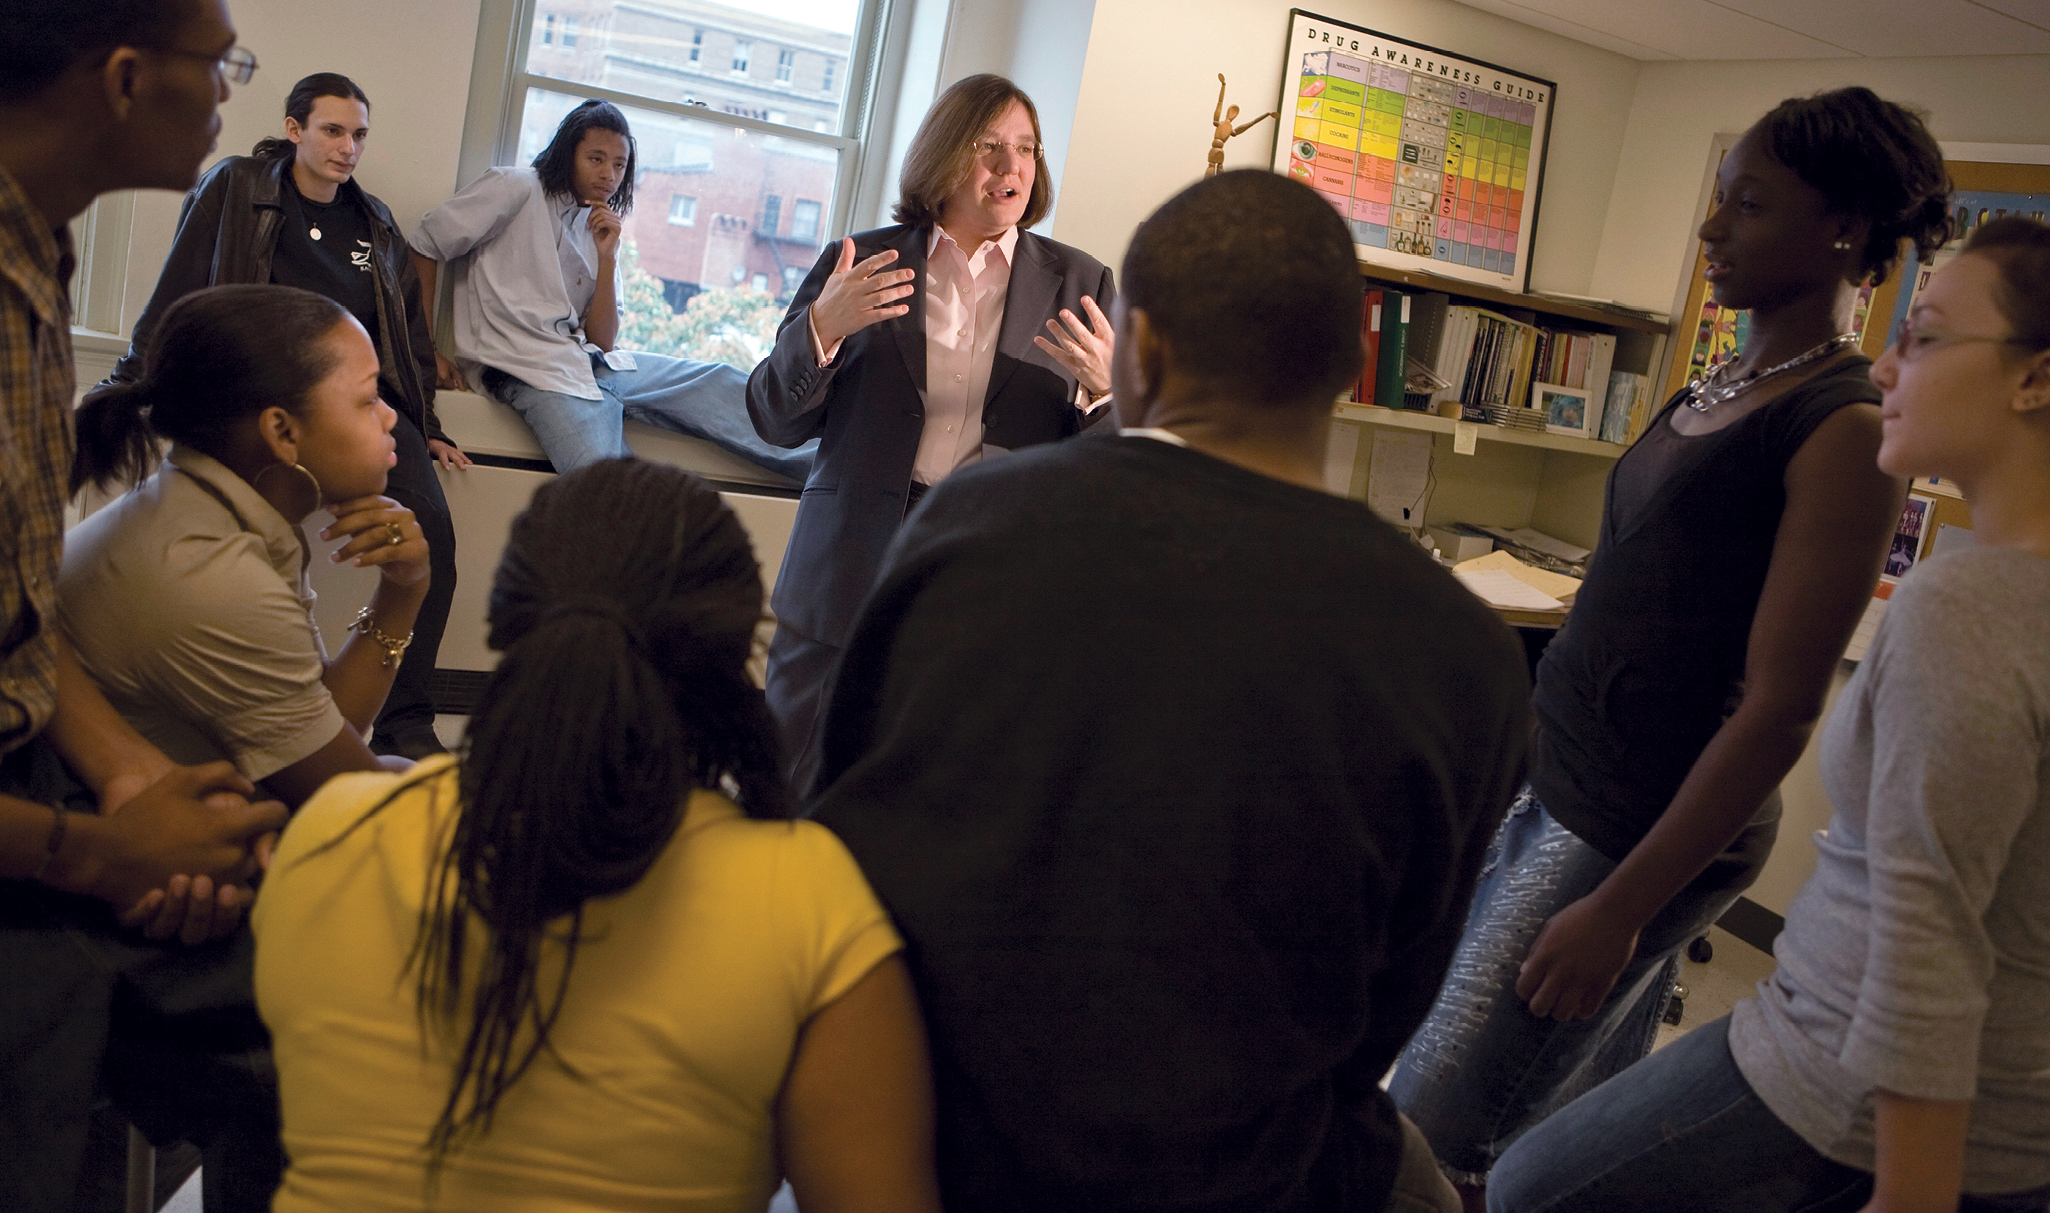 A white woman standing in the center of a group of teens talking